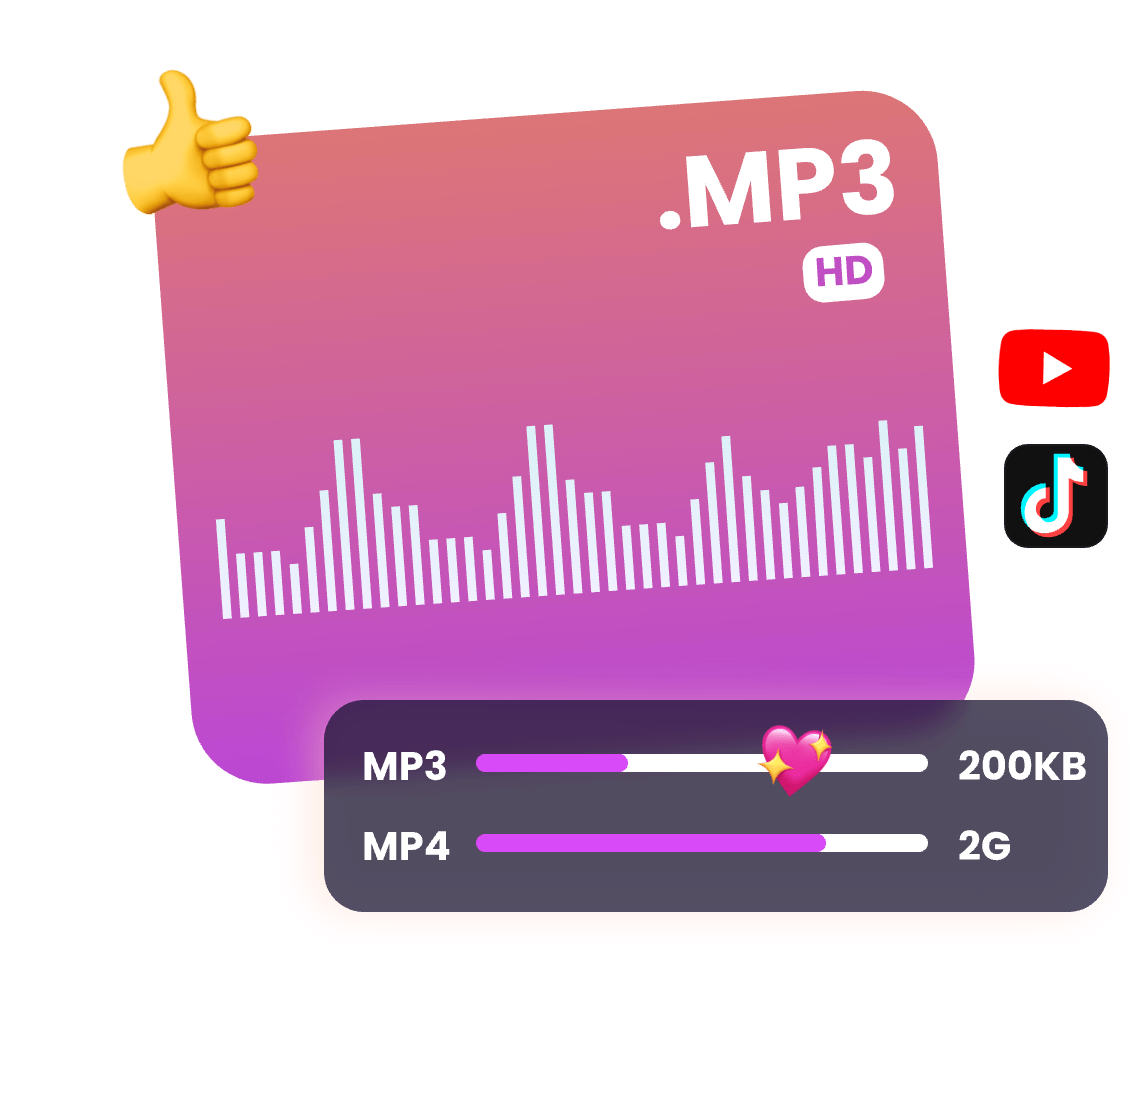 comparison of MP3 and MP4 occupied memory for social media platforms